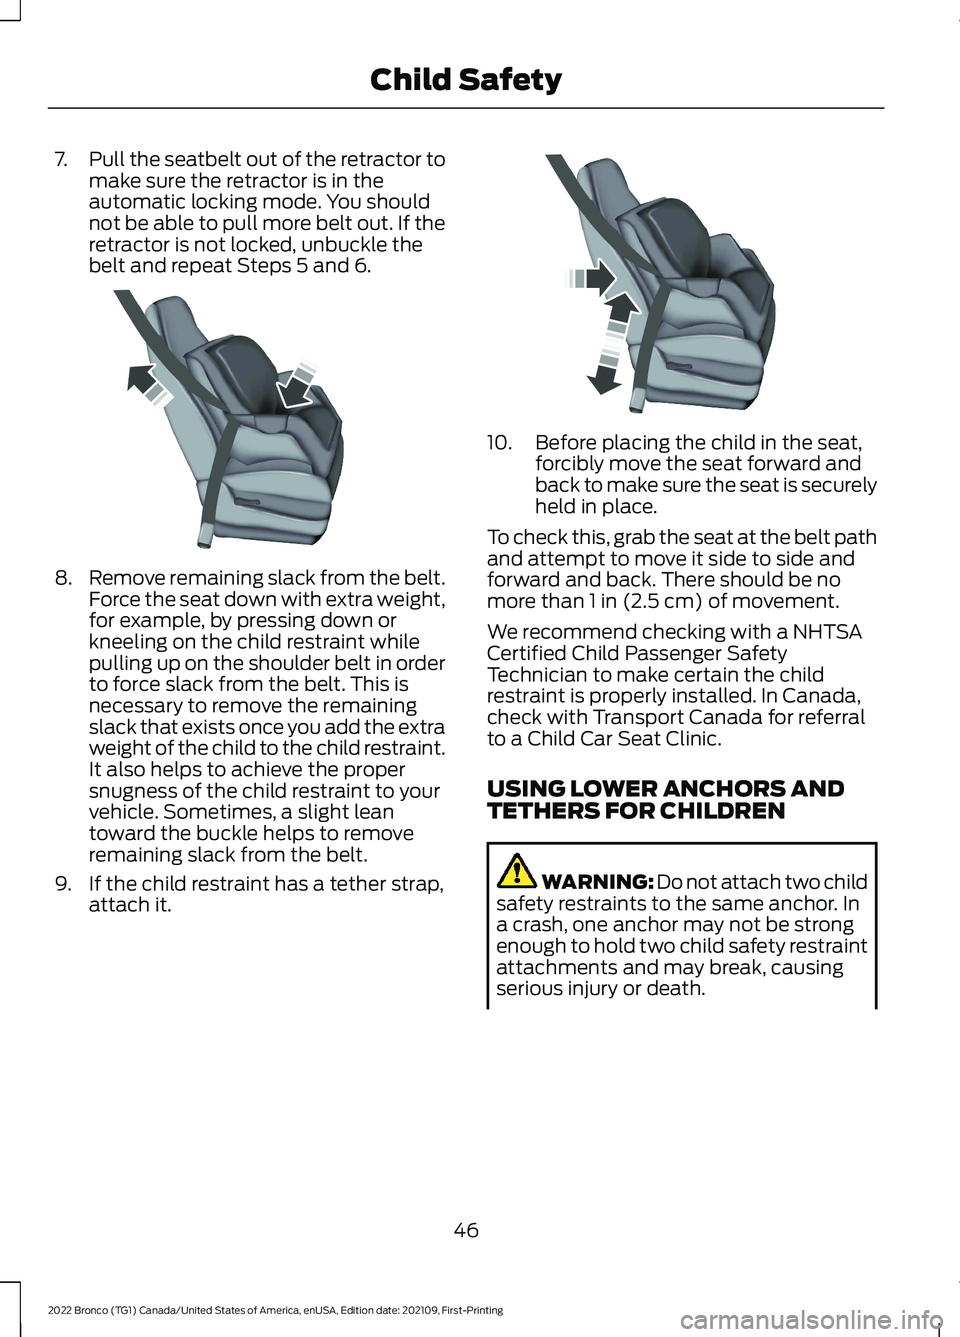 FORD BRONCO 2022  Owners Manual 7.Pull the seatbelt out of the retractor tomake sure the retractor is in theautomatic locking mode. You shouldnot be able to pull more belt out. If theretractor is not locked, unbuckle thebelt and rep